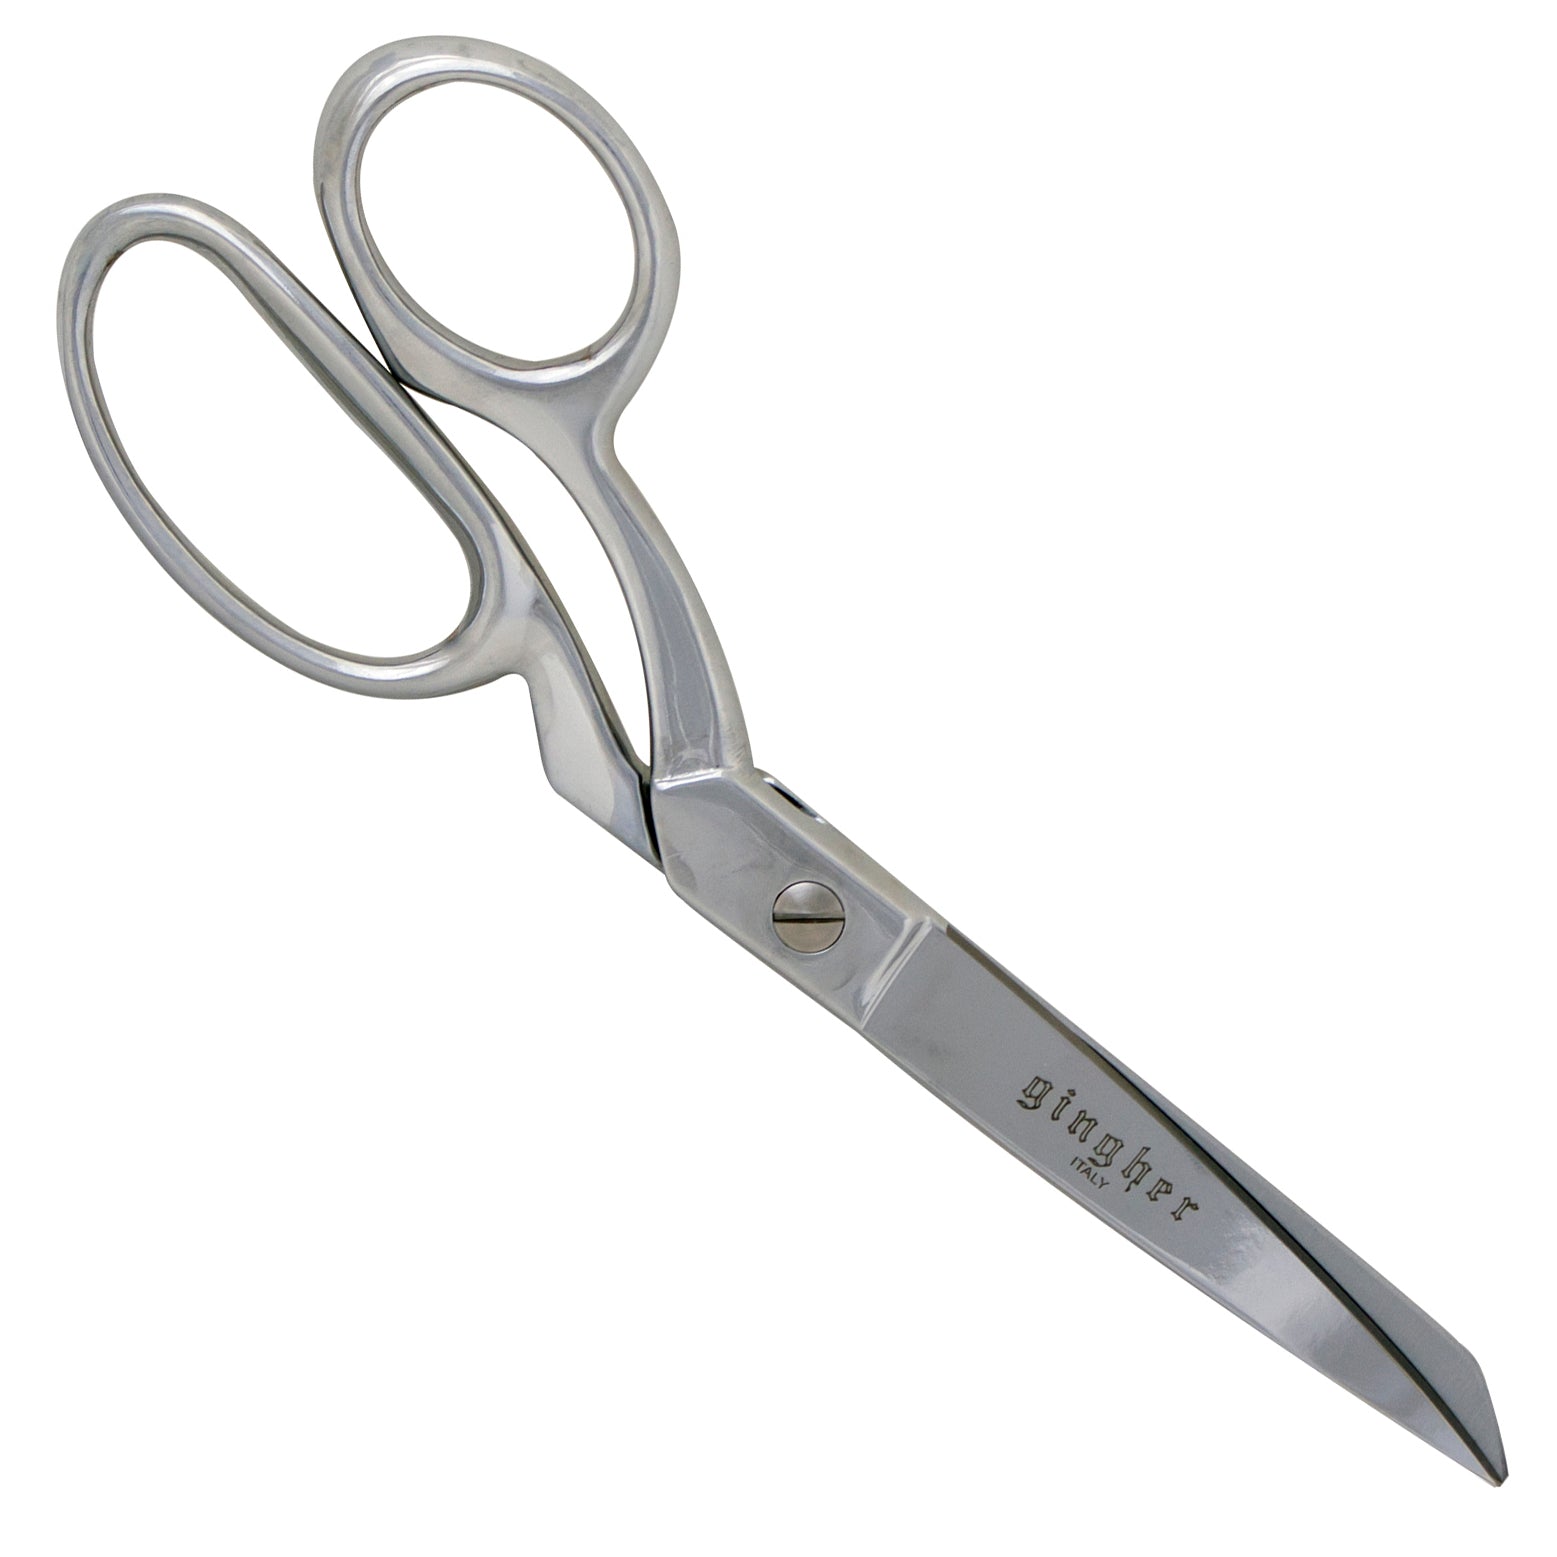 Fabric, Dressmaking, Sewing Scissors Made in Italy